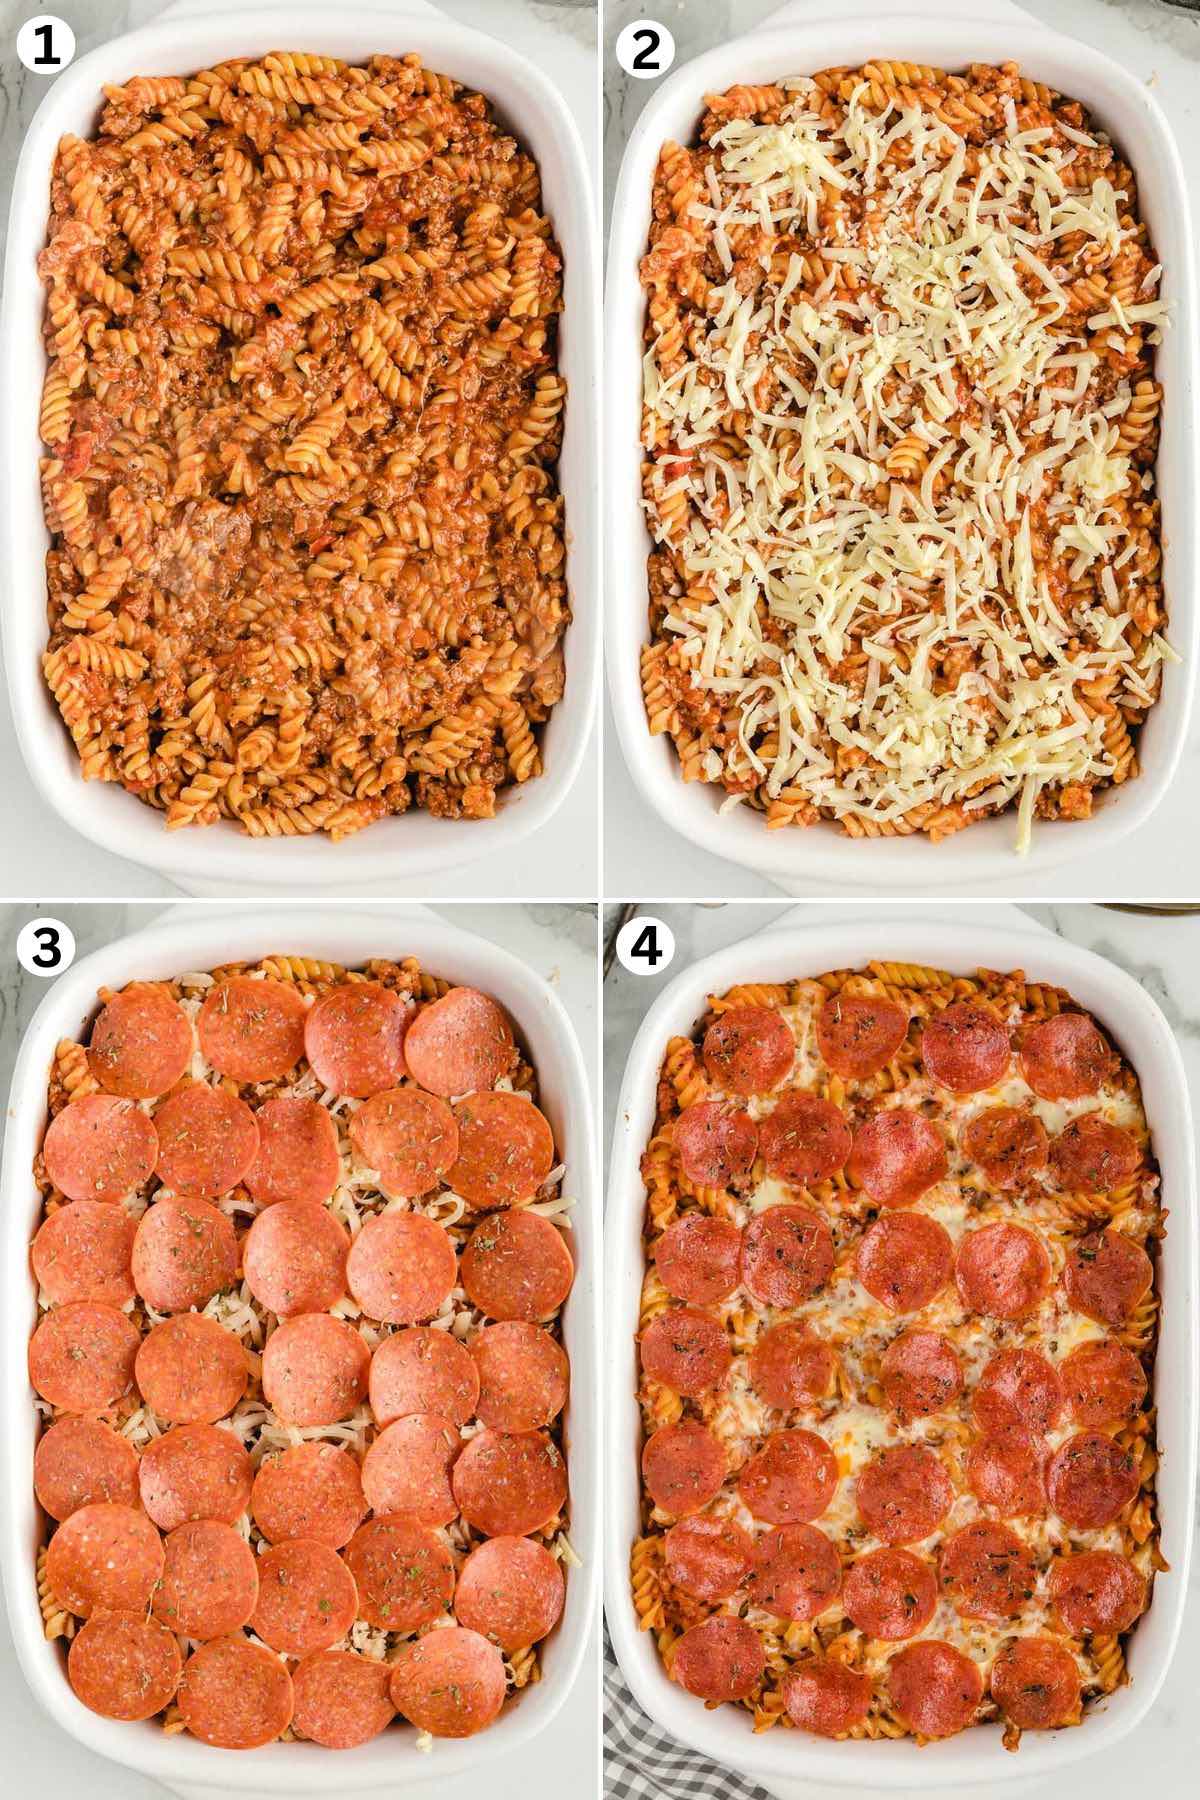 pour cooked pasta in the casserole dish. top with shredded cheese and pepperoni slices and bake.